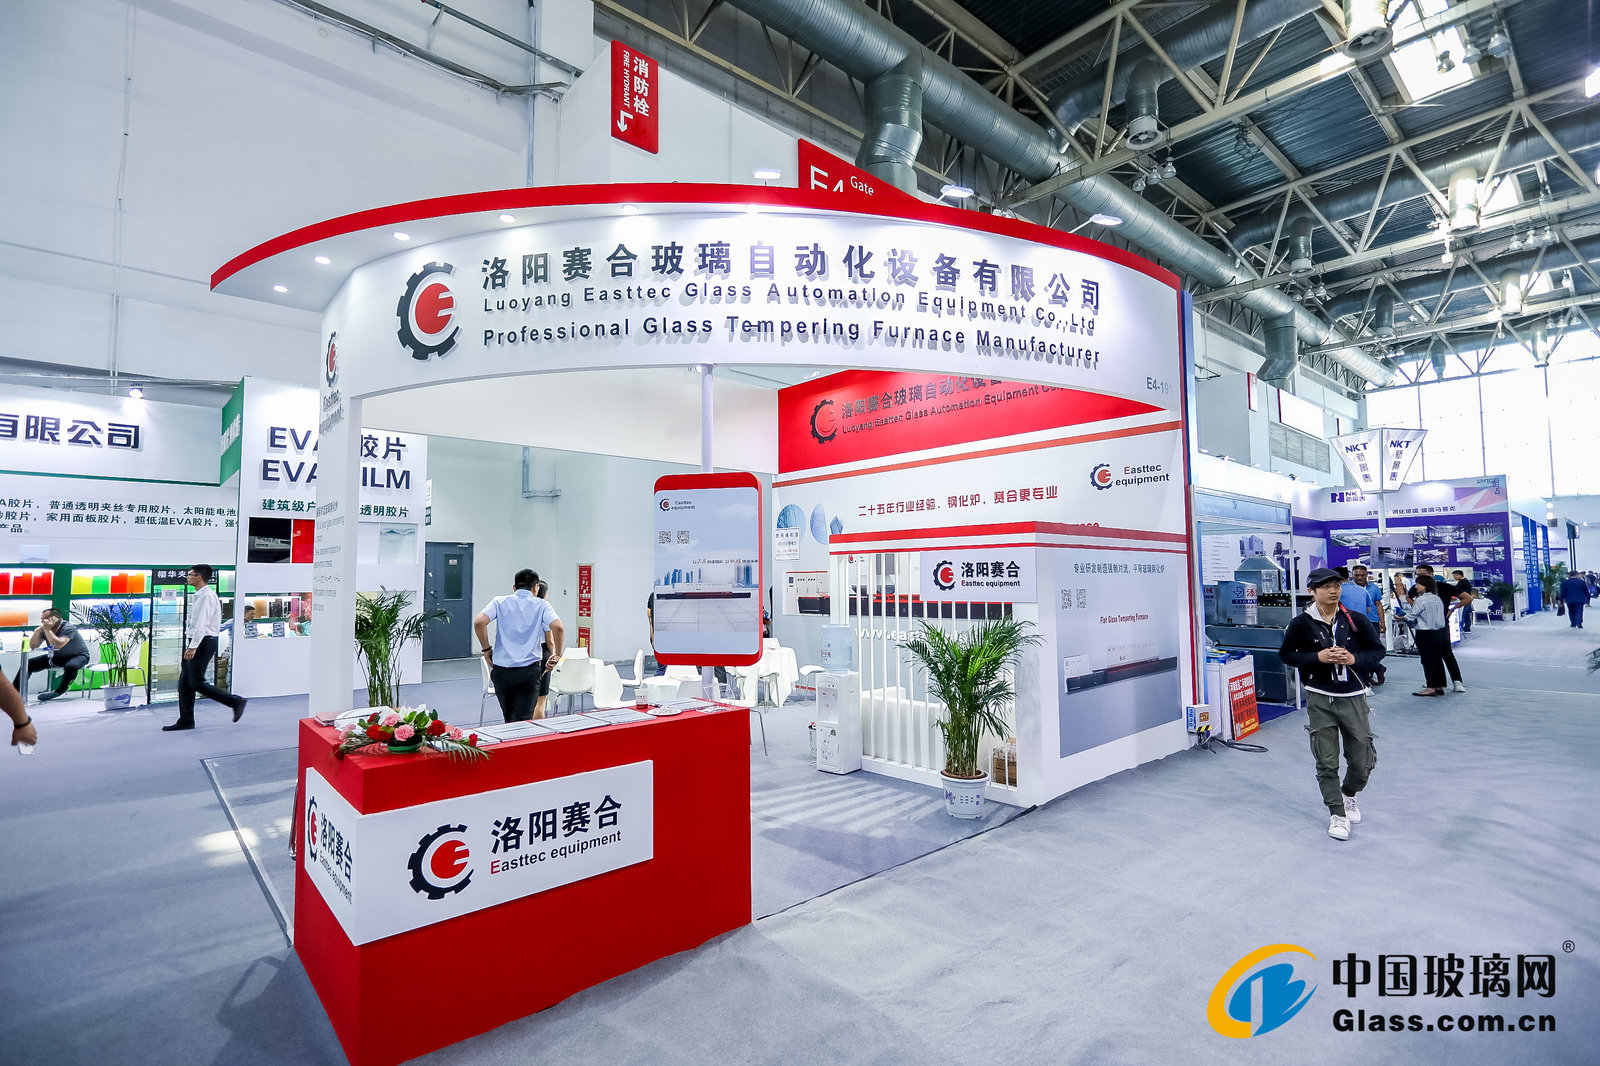 Luoyang Easttec Glass Automation Equipment